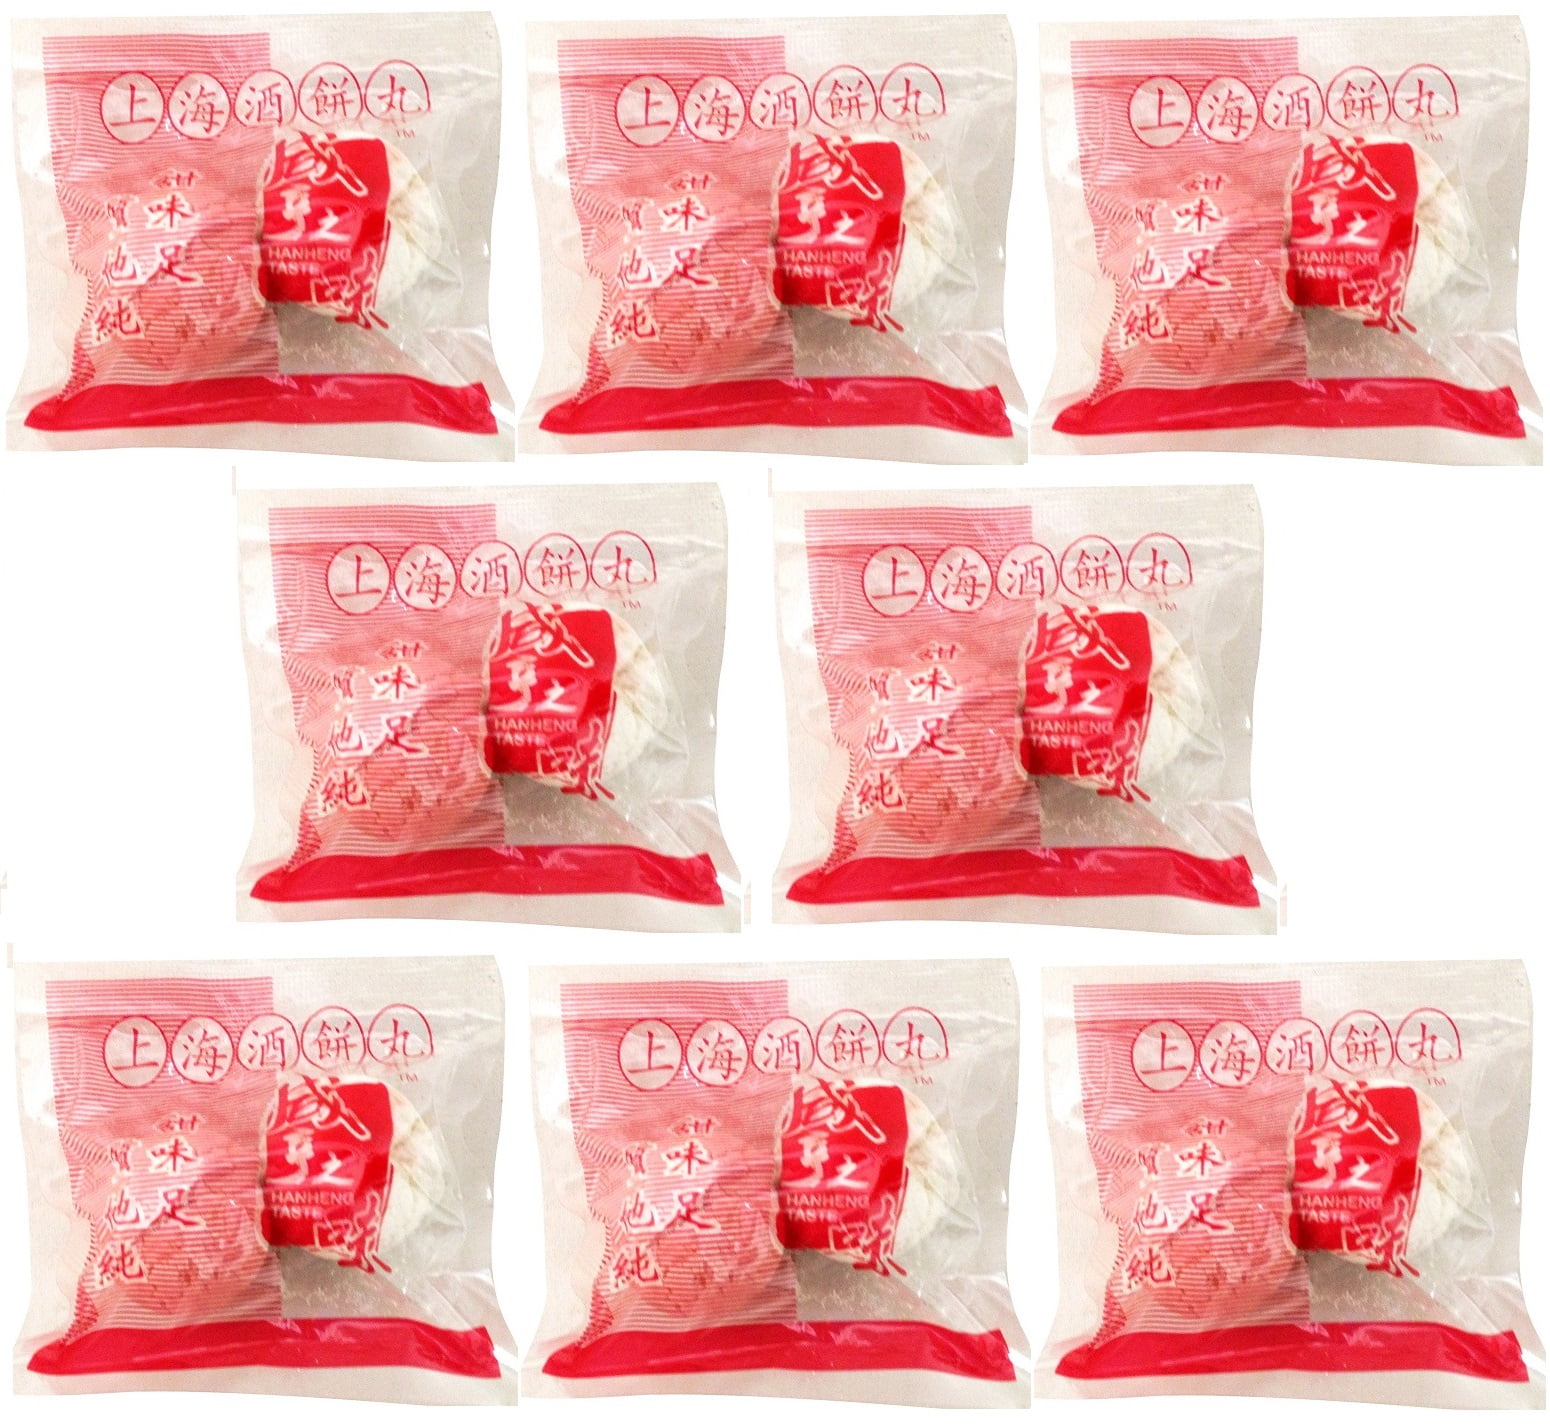 20 PCS/100g Chinese DRIED YEAST BALLS FOR Sweet RICE WINE 